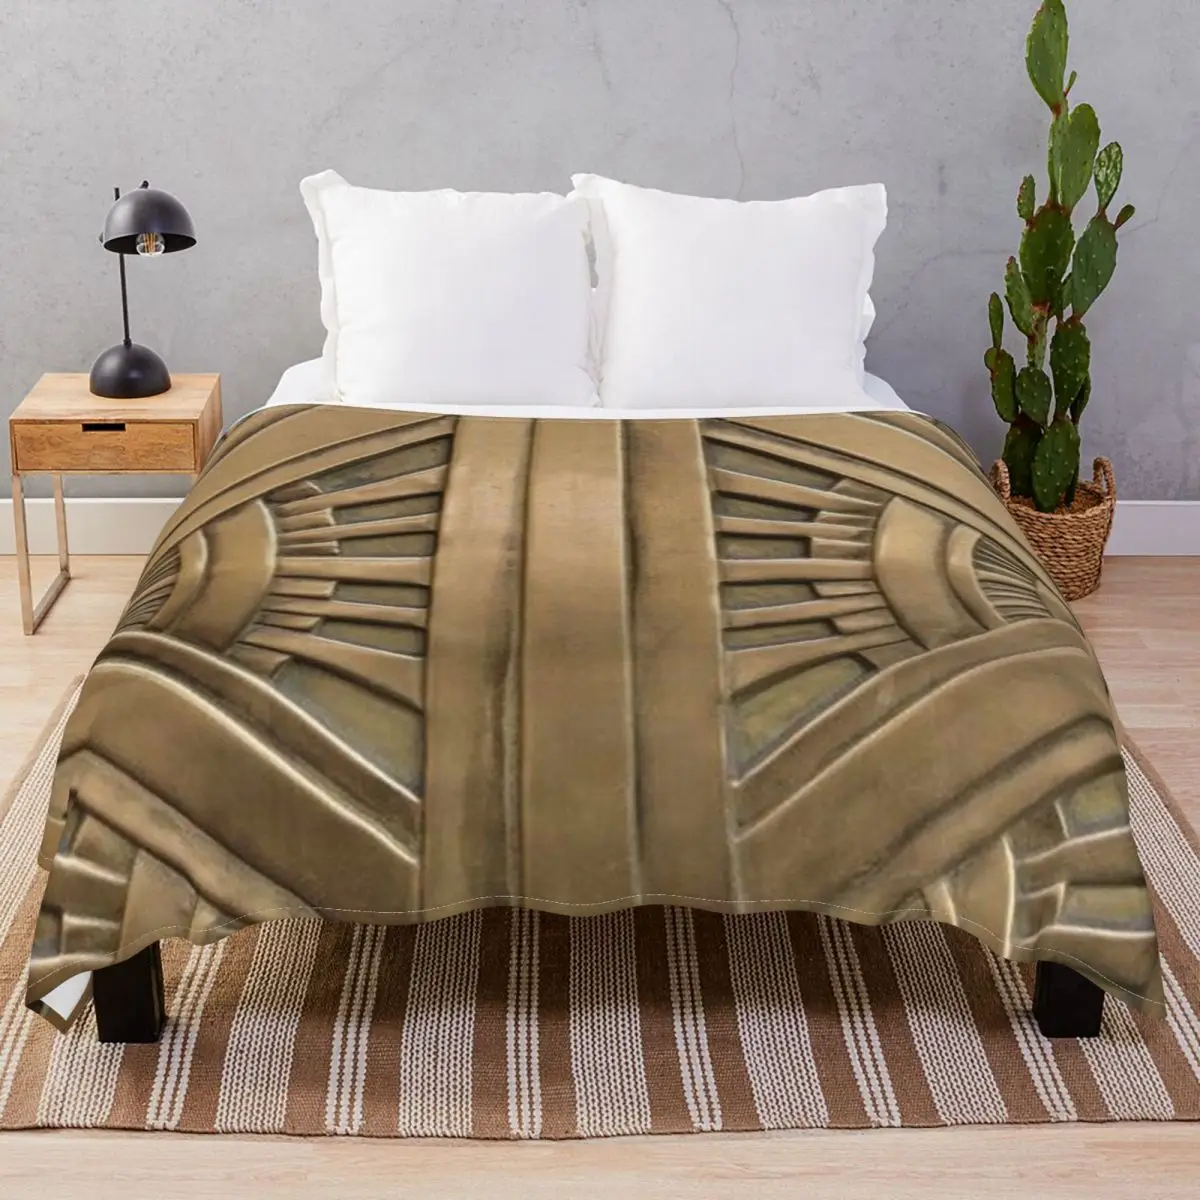 Bronze Beautiful The Great Gatsby Blankets Coral Fleece Print Soft Throw Blanket for Bedding Sofa Travel Office